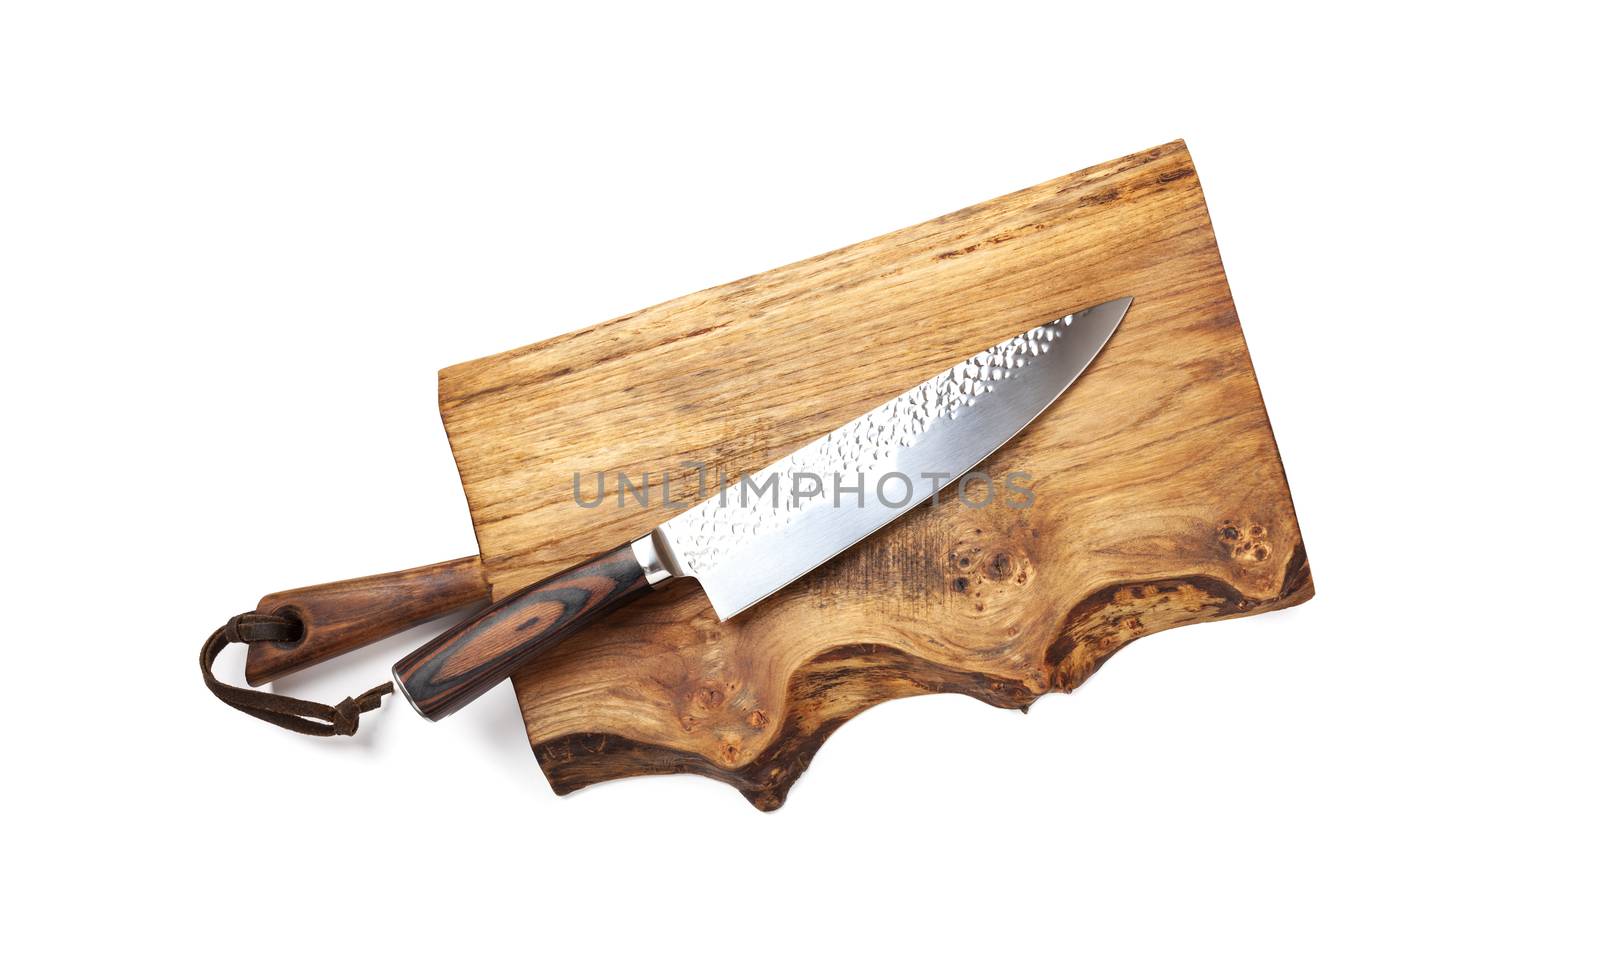 Knife for kitchen on old wooden cutting Board. Isolated on white background